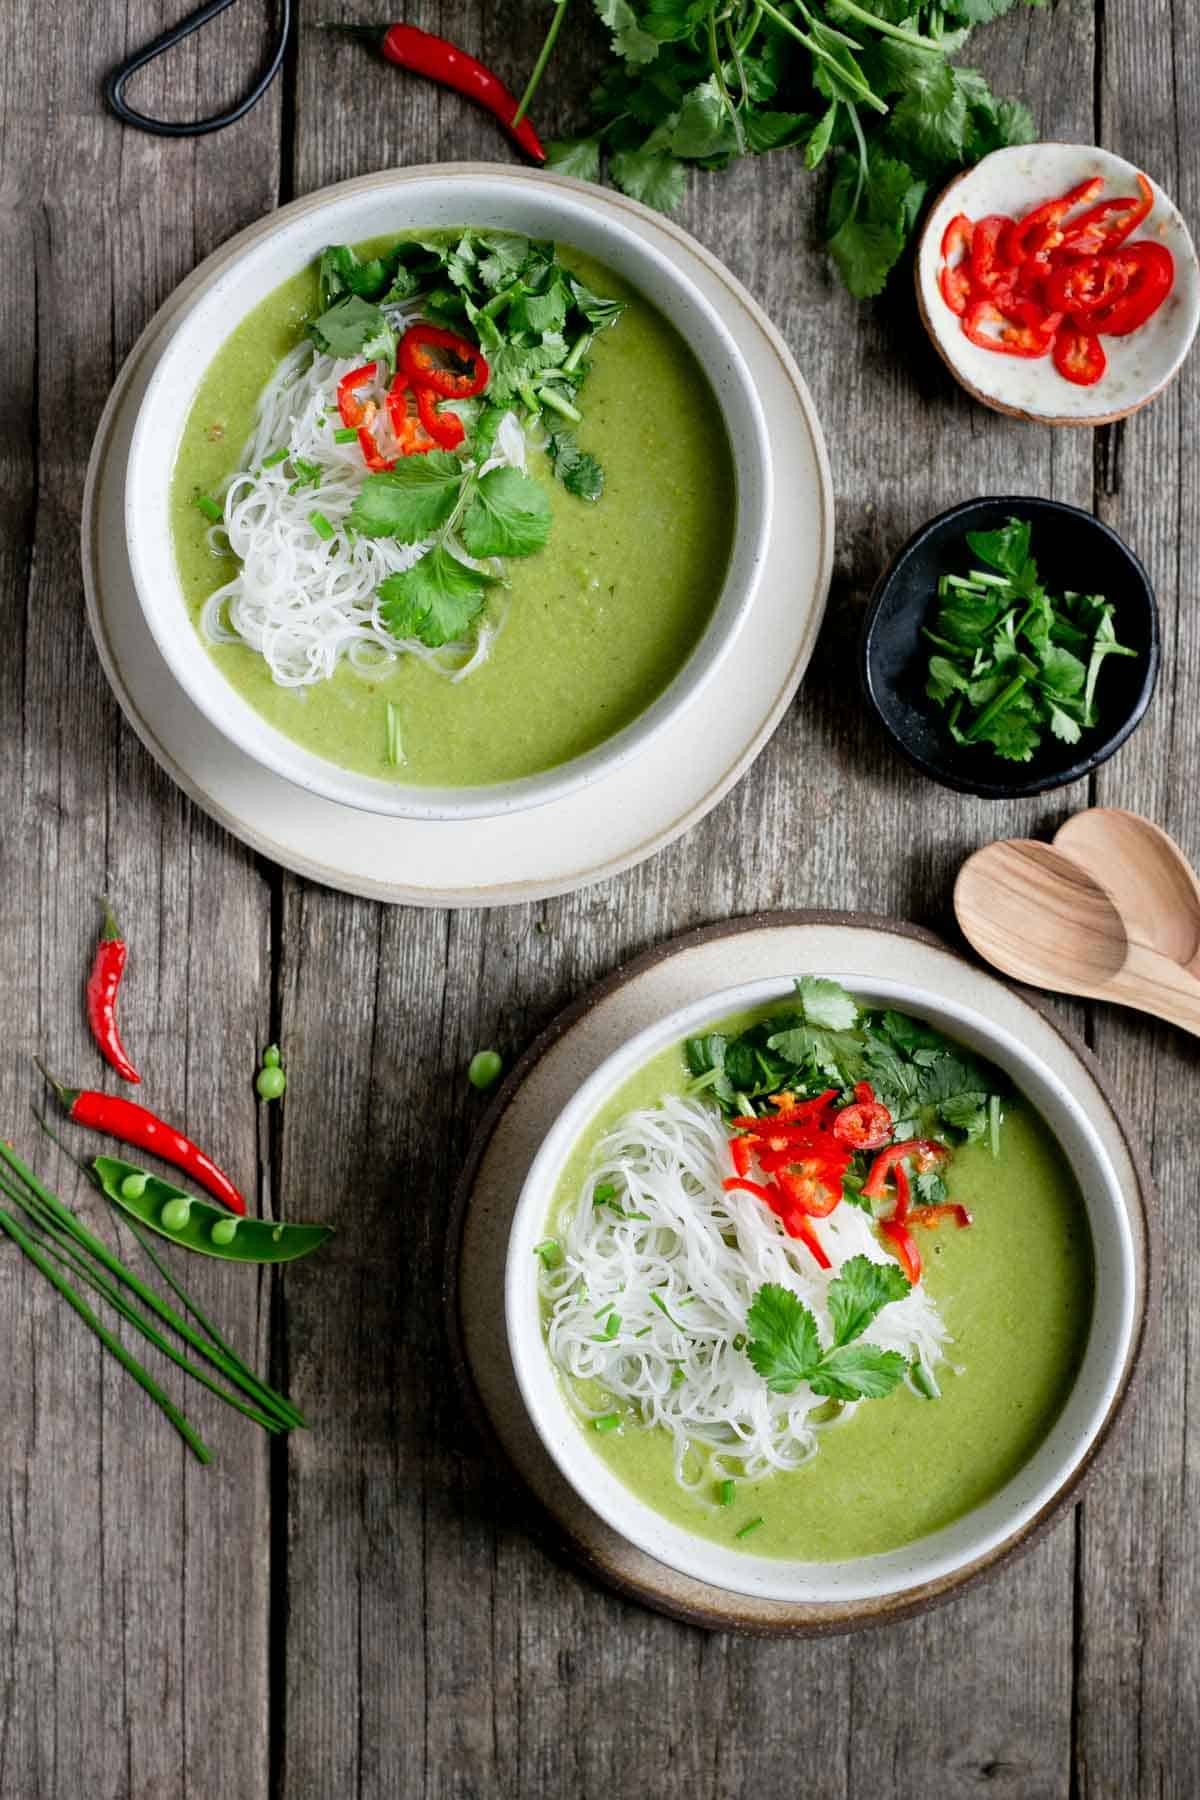 Thai style pea and apple soup, made with 7 ingredients, ready in under 30 minutes! #easyrecipe #healthysoup #vegan | via @annabanana.co